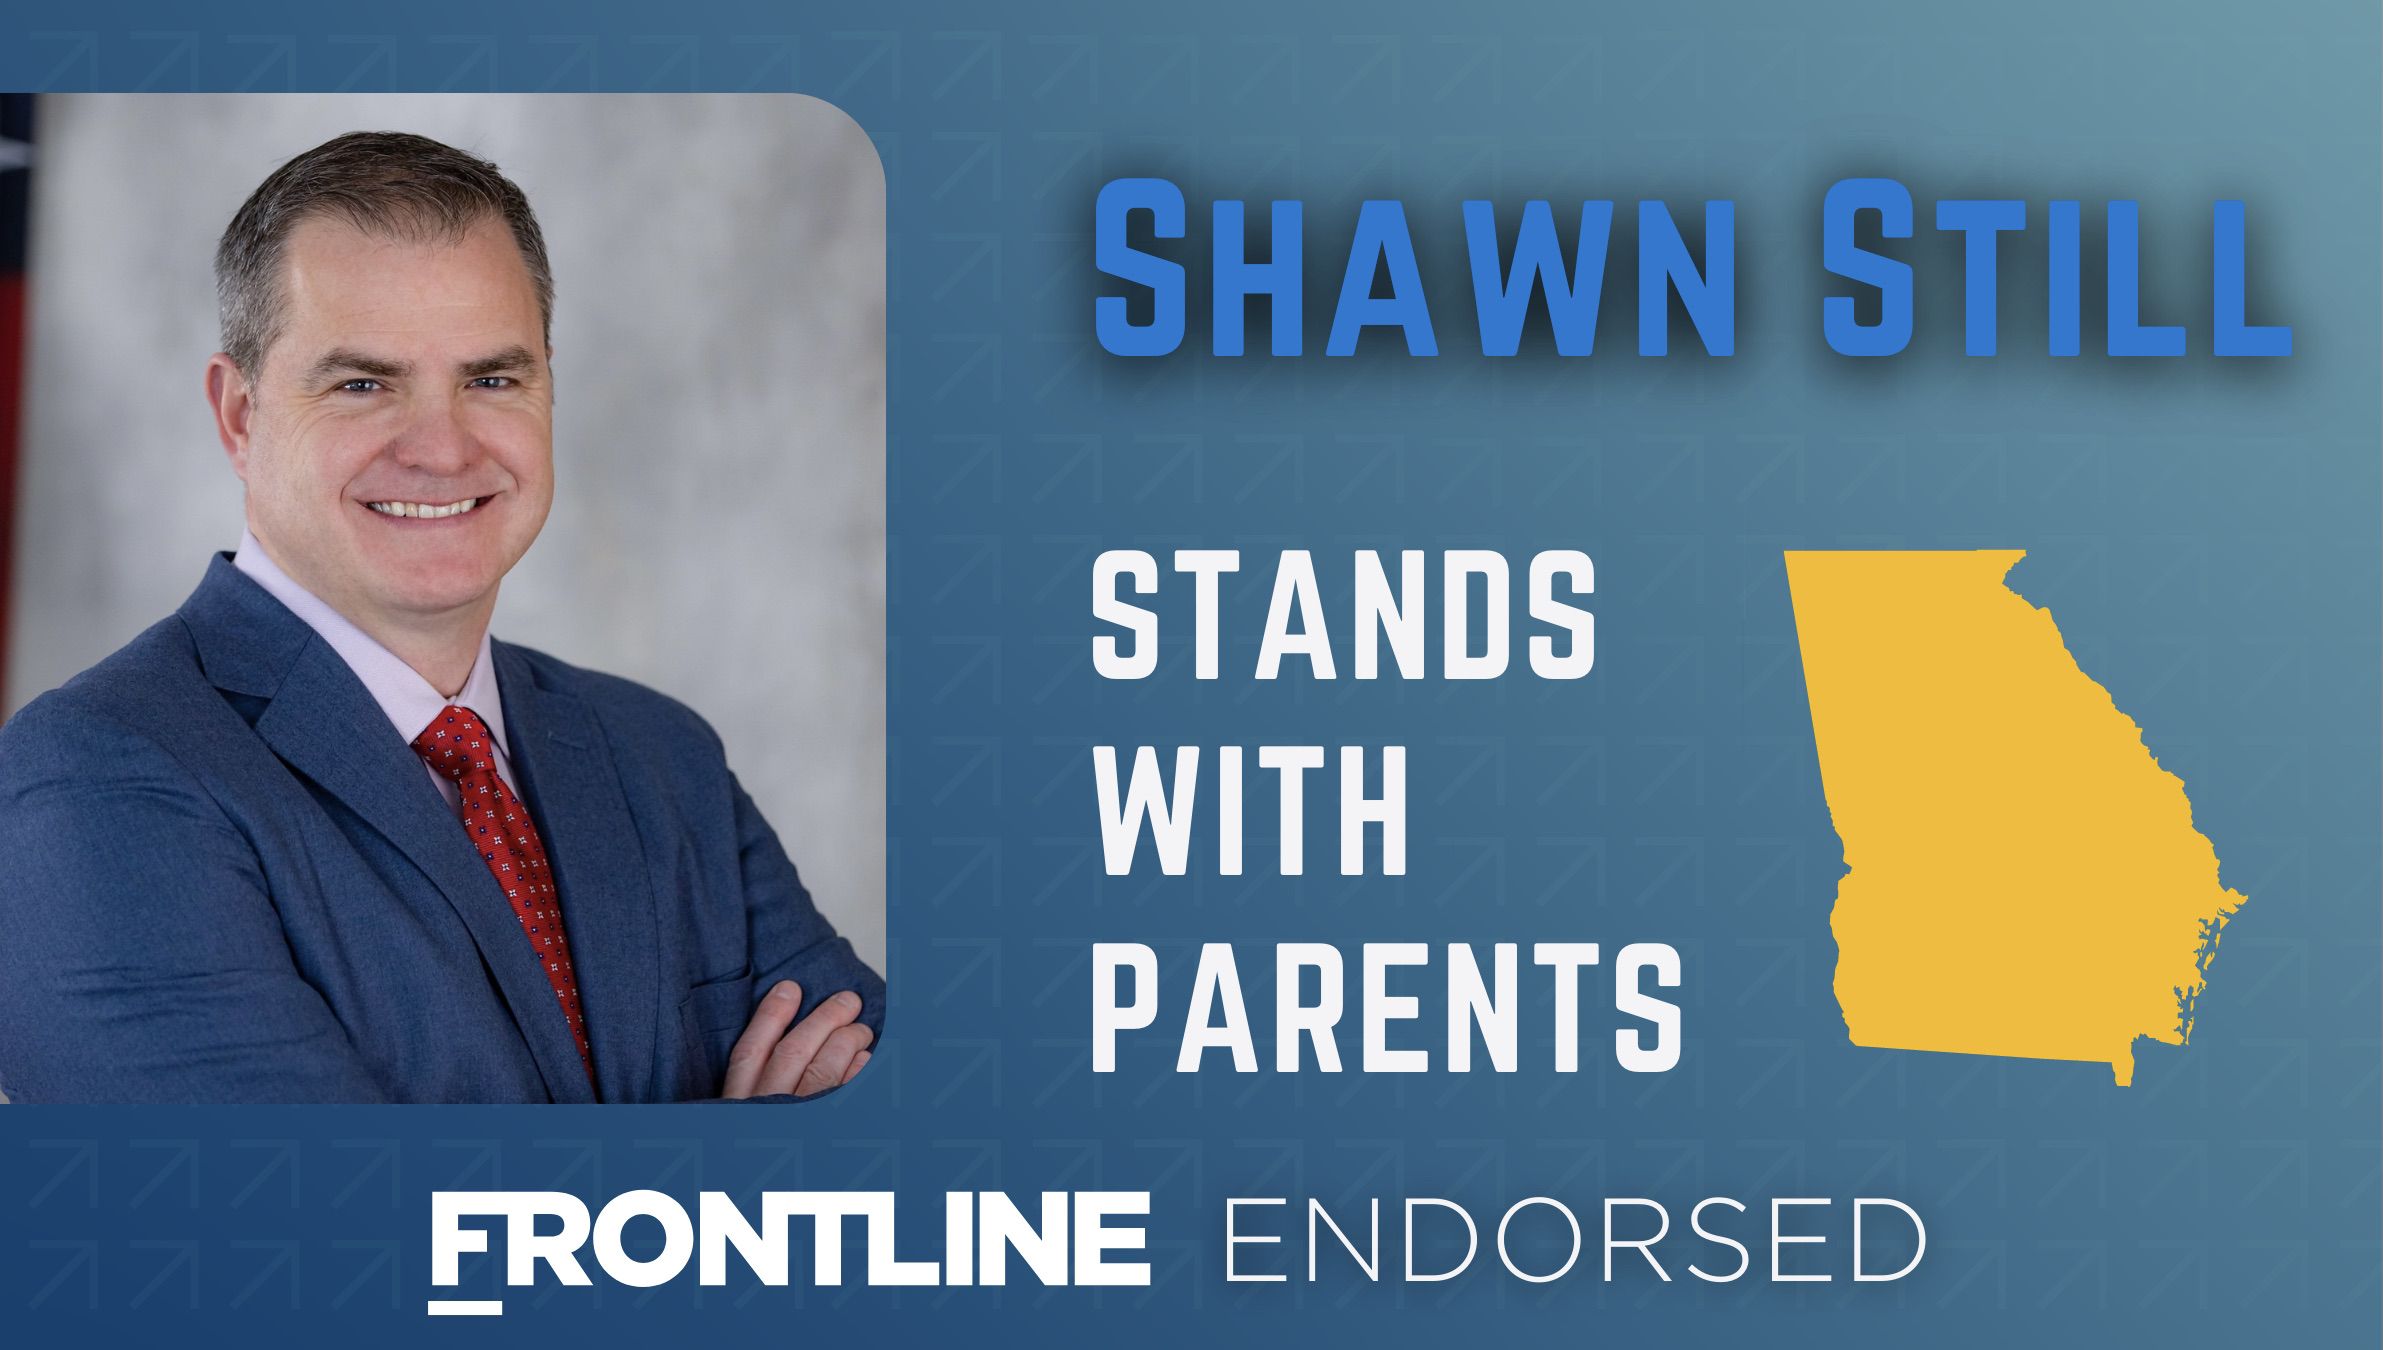 Reminder – Vote for Shawn Still for State Senate District 48